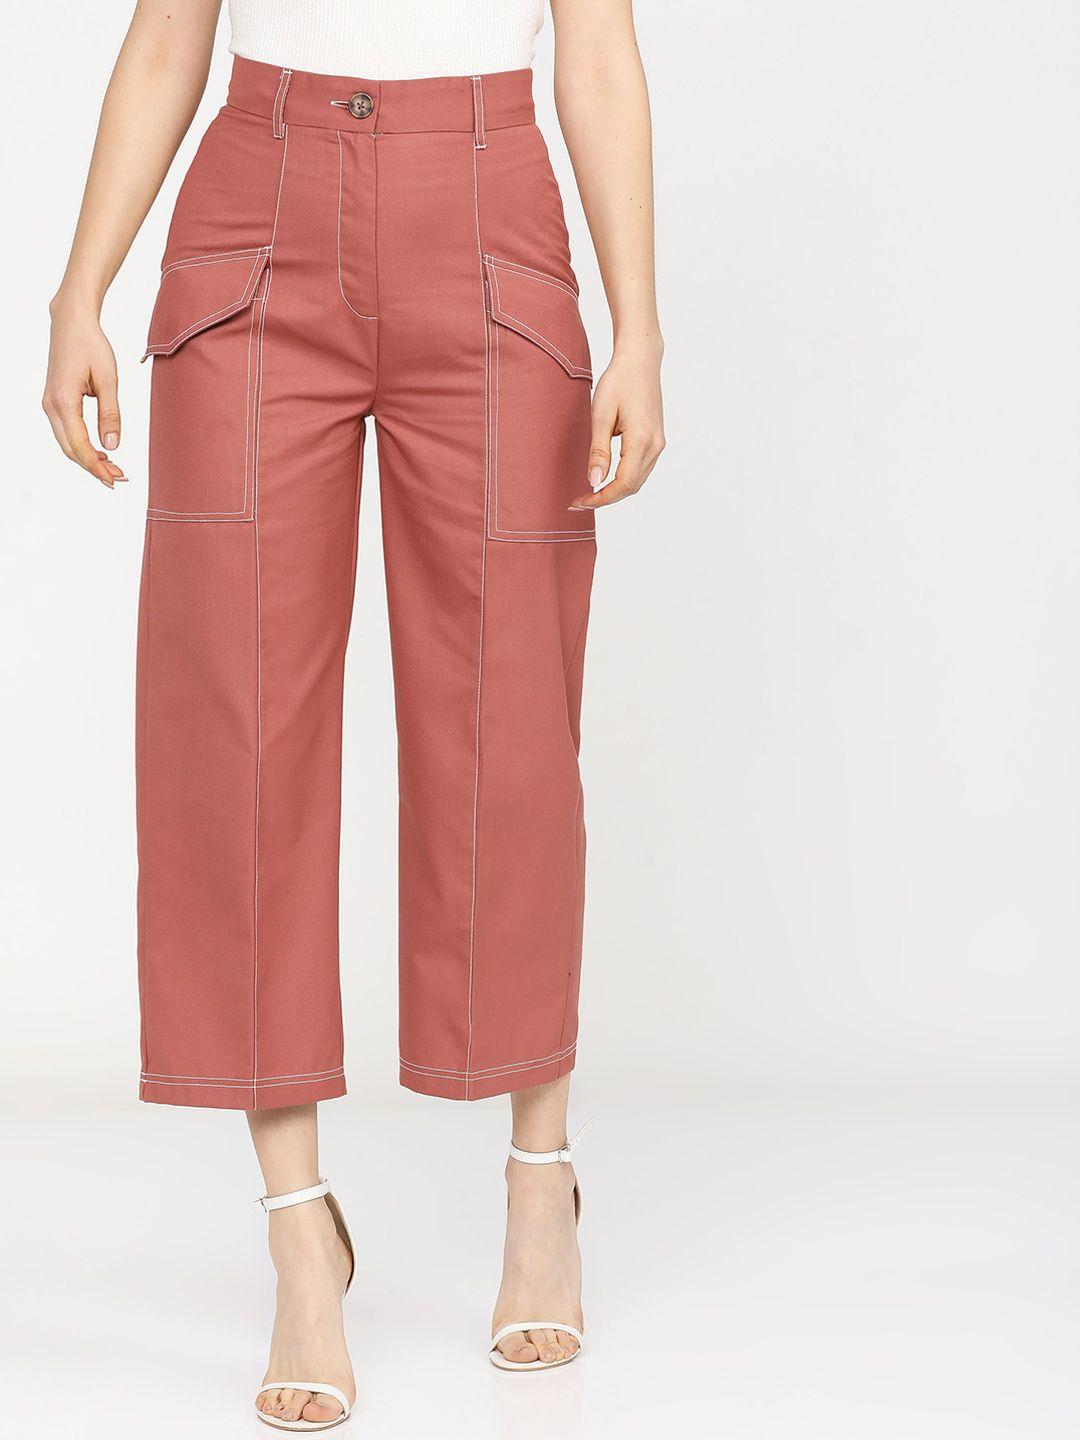 tokyo-talkies-women-rust-straight-fit-pleated-culottes-trousers